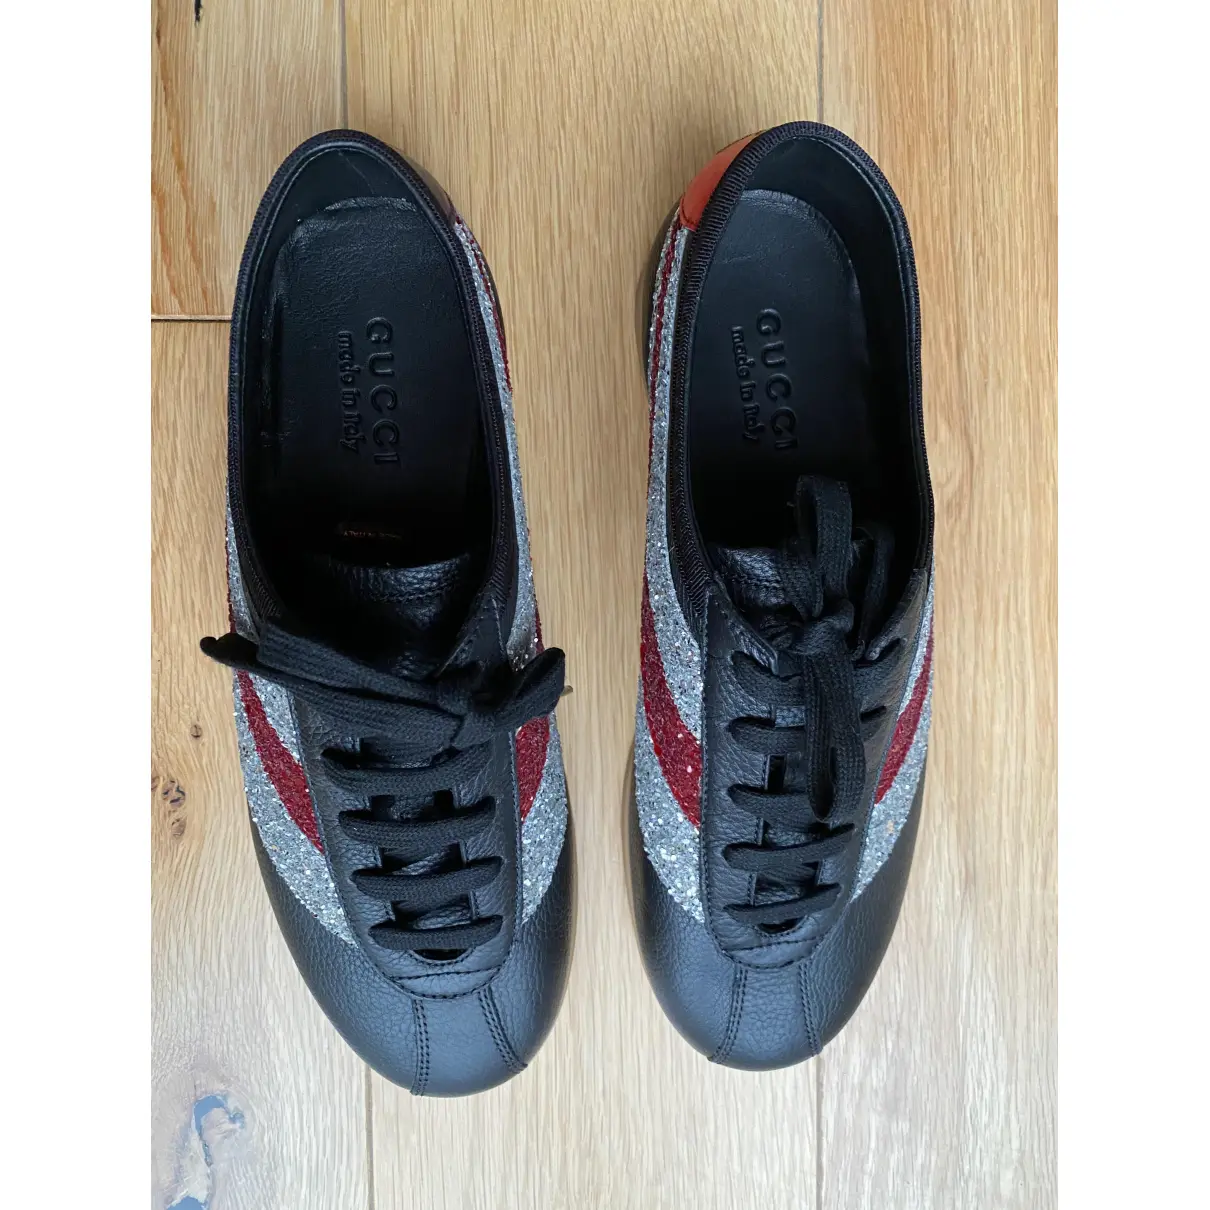 Buy Gucci Falacer leather low trainers online